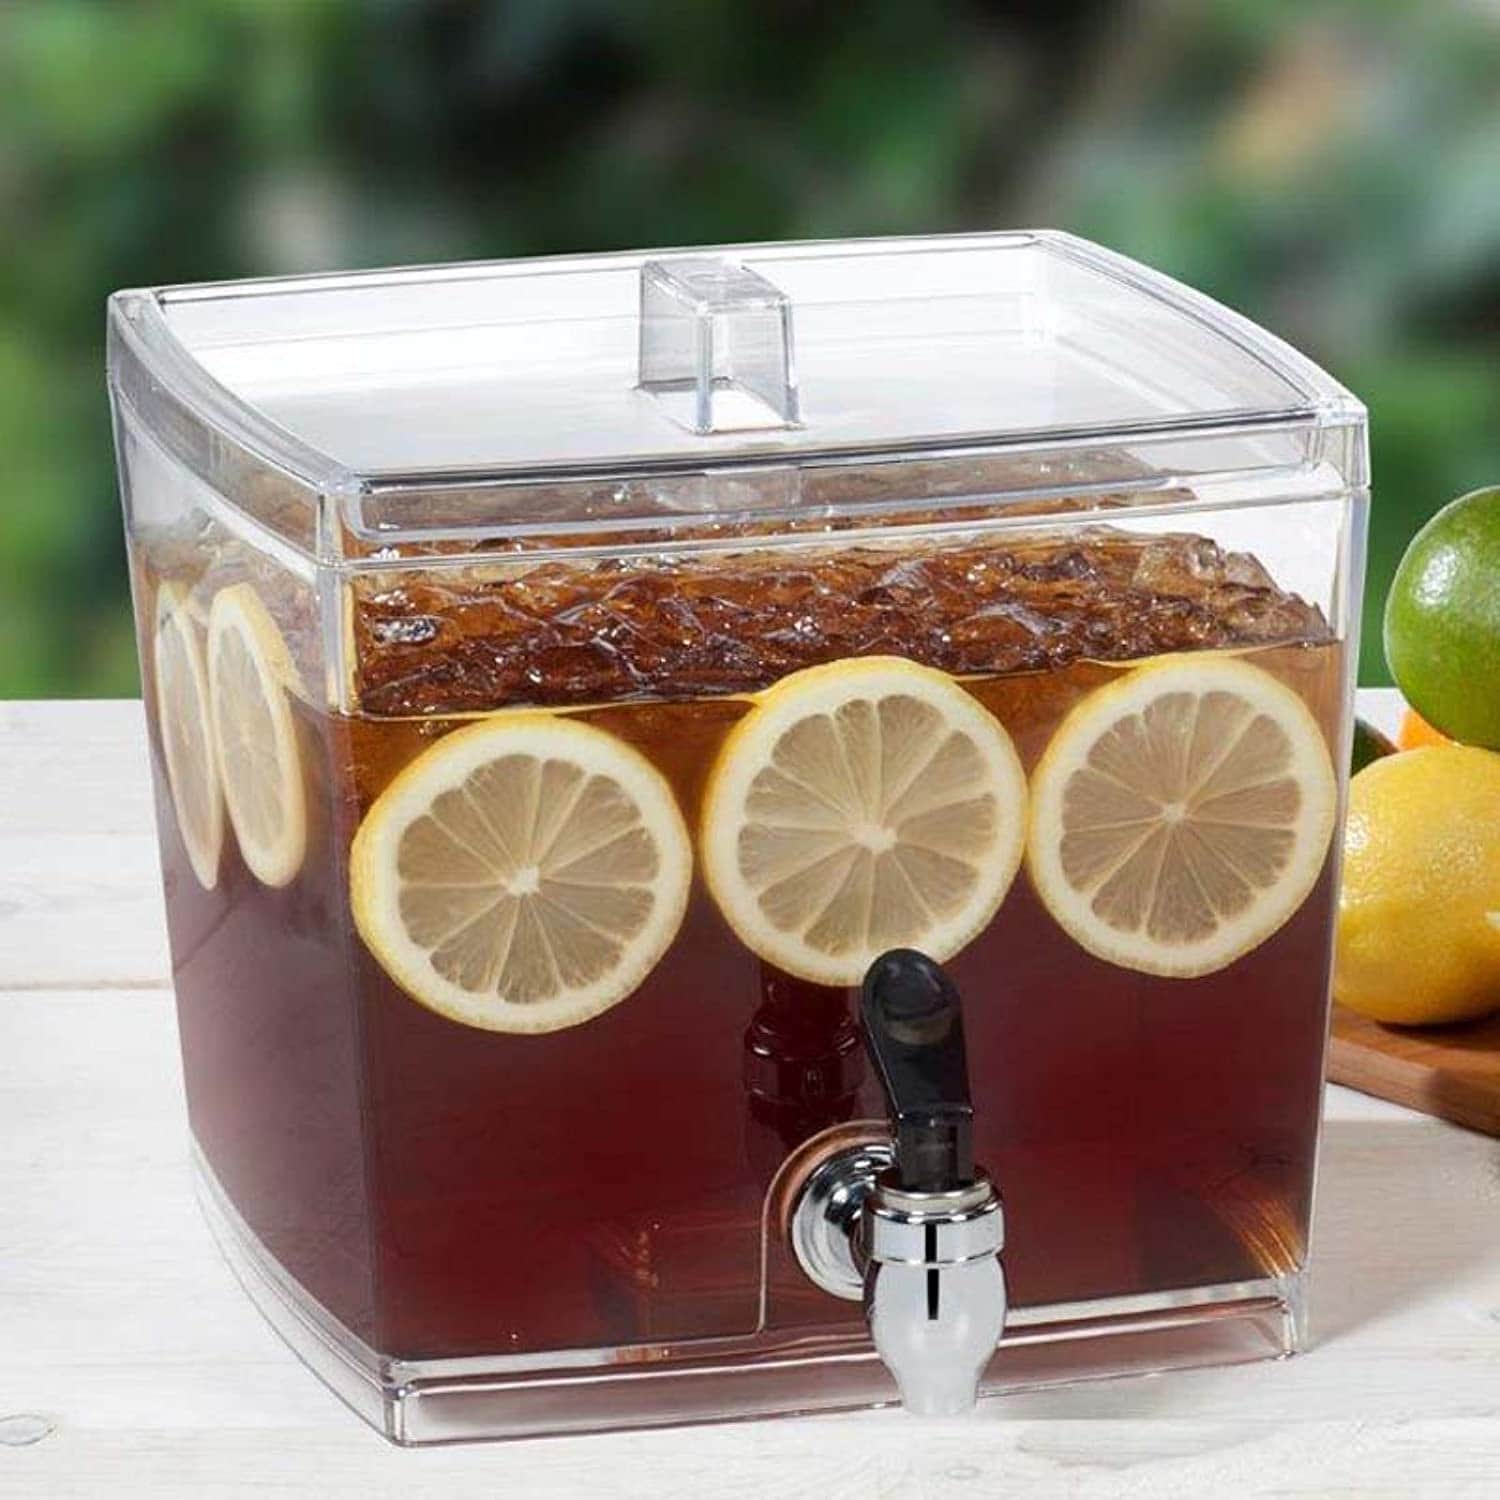 https://ak1.ostkcdn.com/images/products/is/images/direct/cee505111fd389e51a5abdae8d617be27a9c5416/CreativeWare-Beverage-Dispenser-with-No-Base-Sleeve%2C-1.5-gallon.jpg